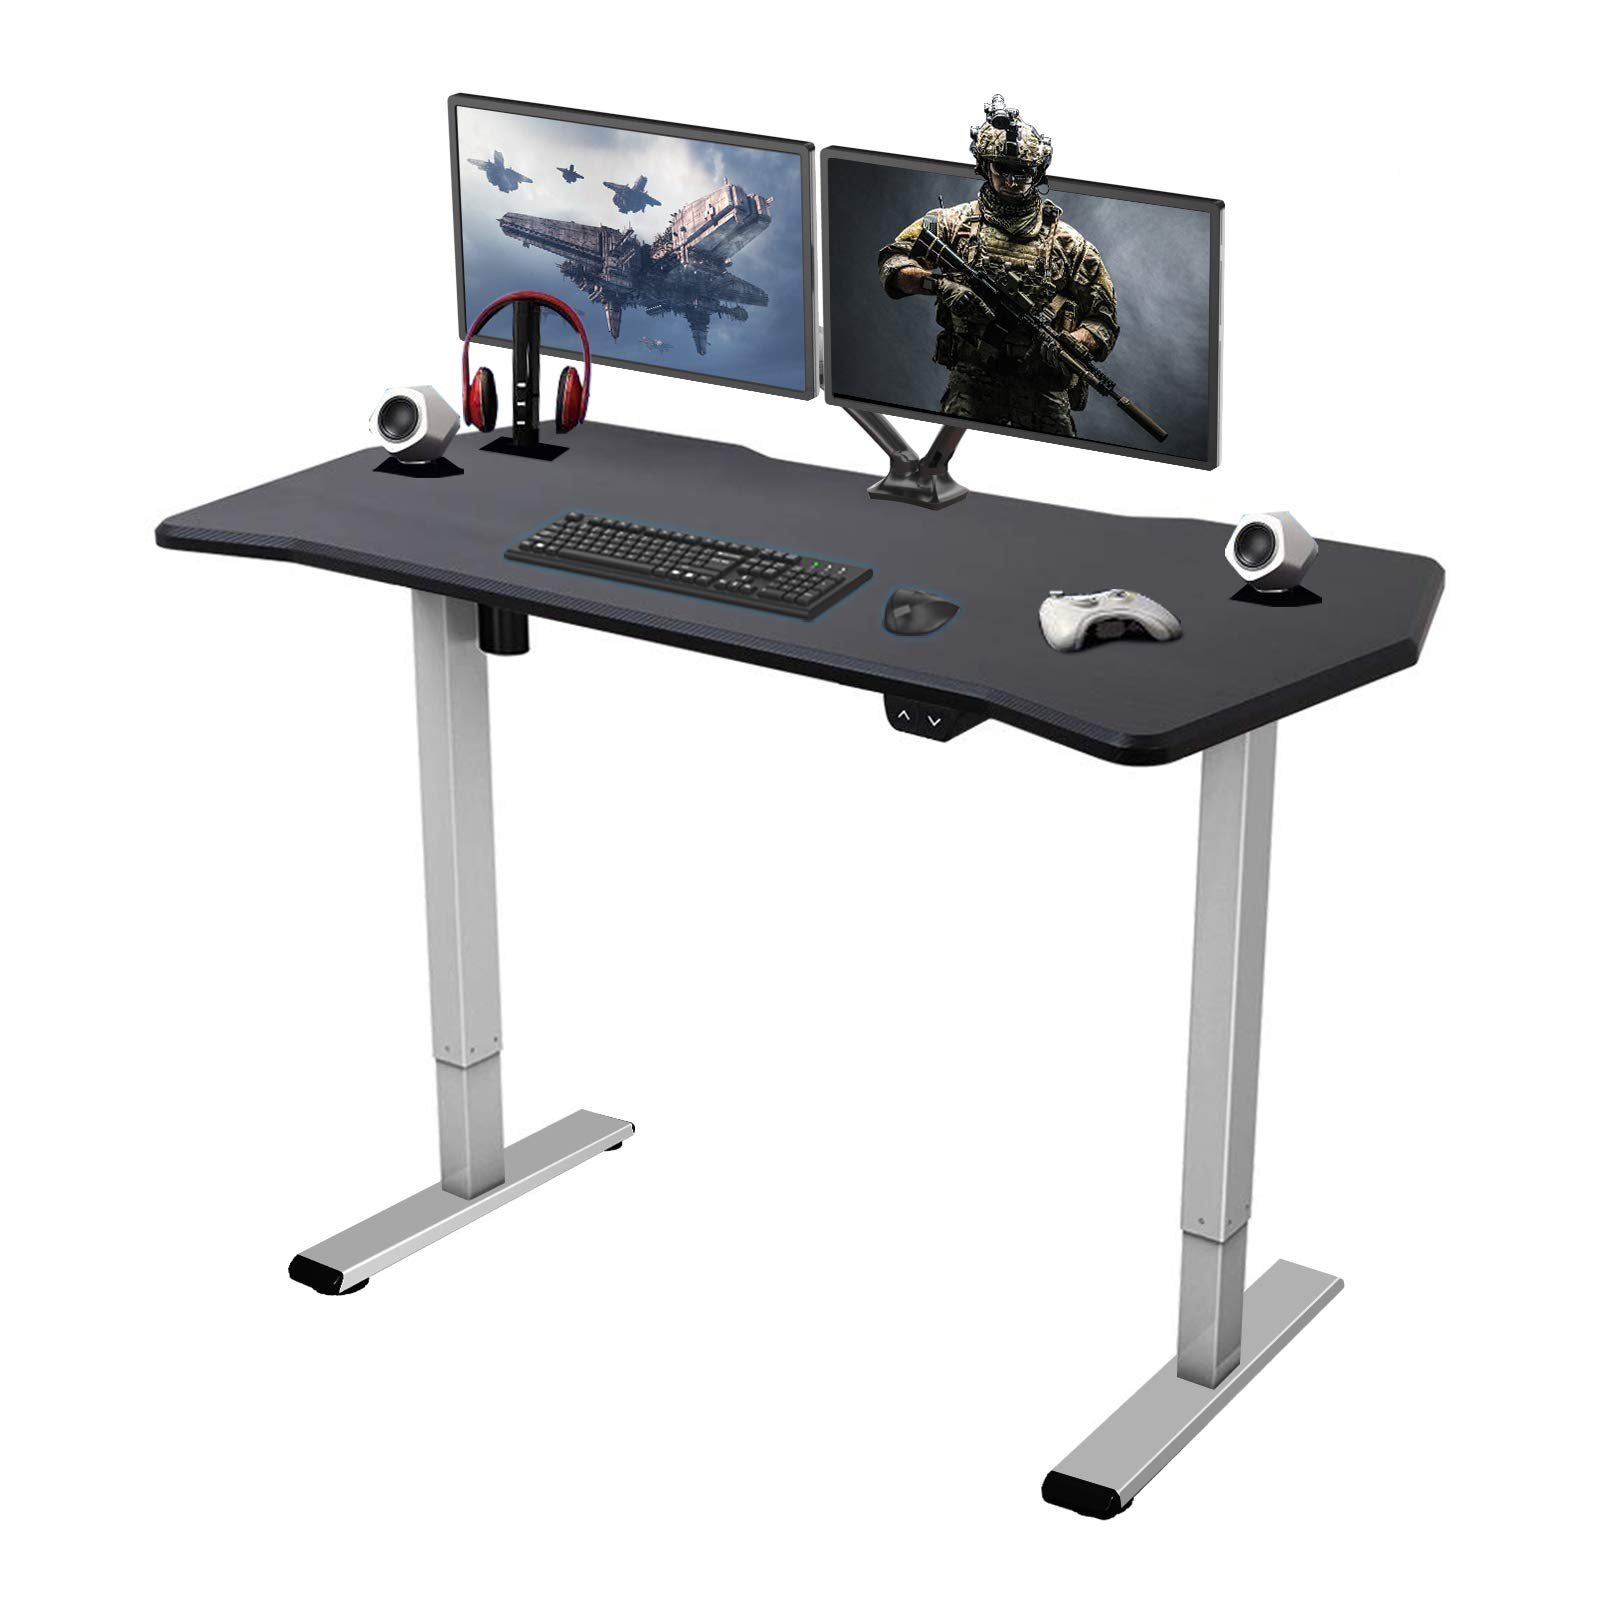 FLEXISPOT Height Adjustable PC Gaming Desk 55 x 27 Inches Computer Table for E-Sports Gamer Gray Frame with Game Top